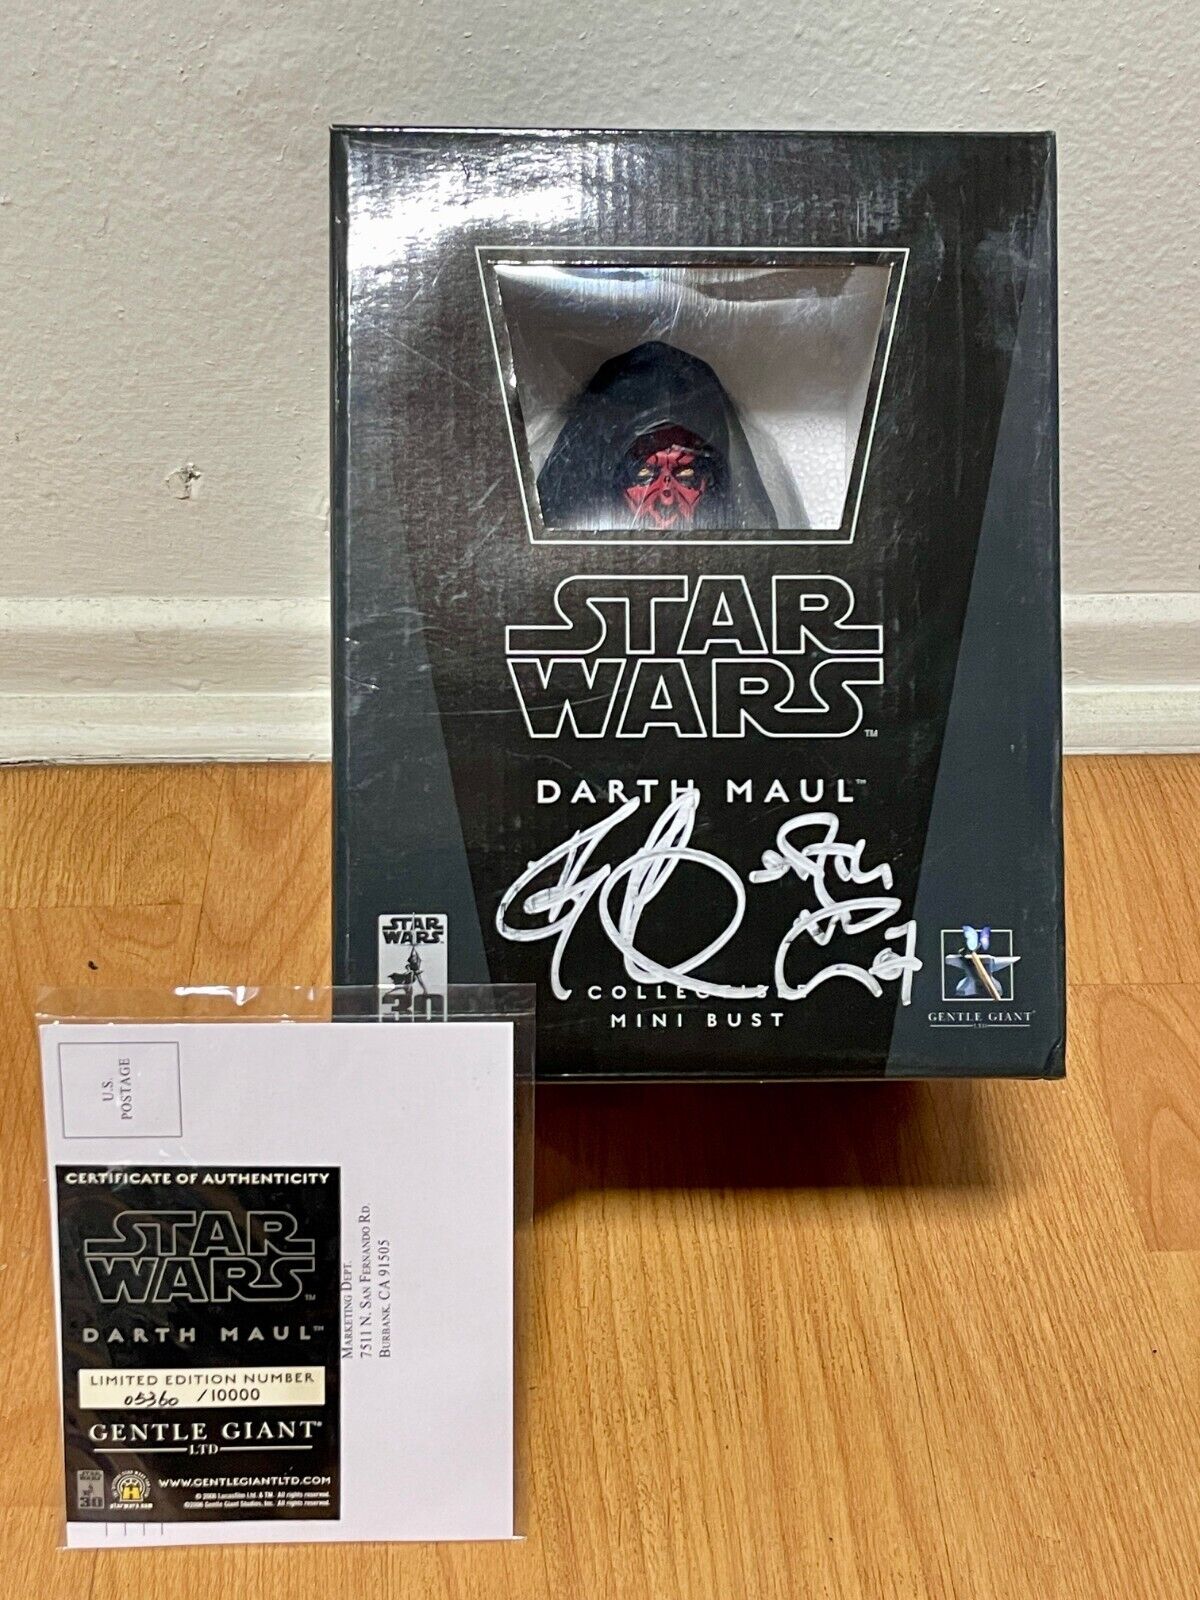 Gentle Giant Star Wars Darth Maul 1/6 scale Mini Bust#05360/10000 with AUTOGRAPH